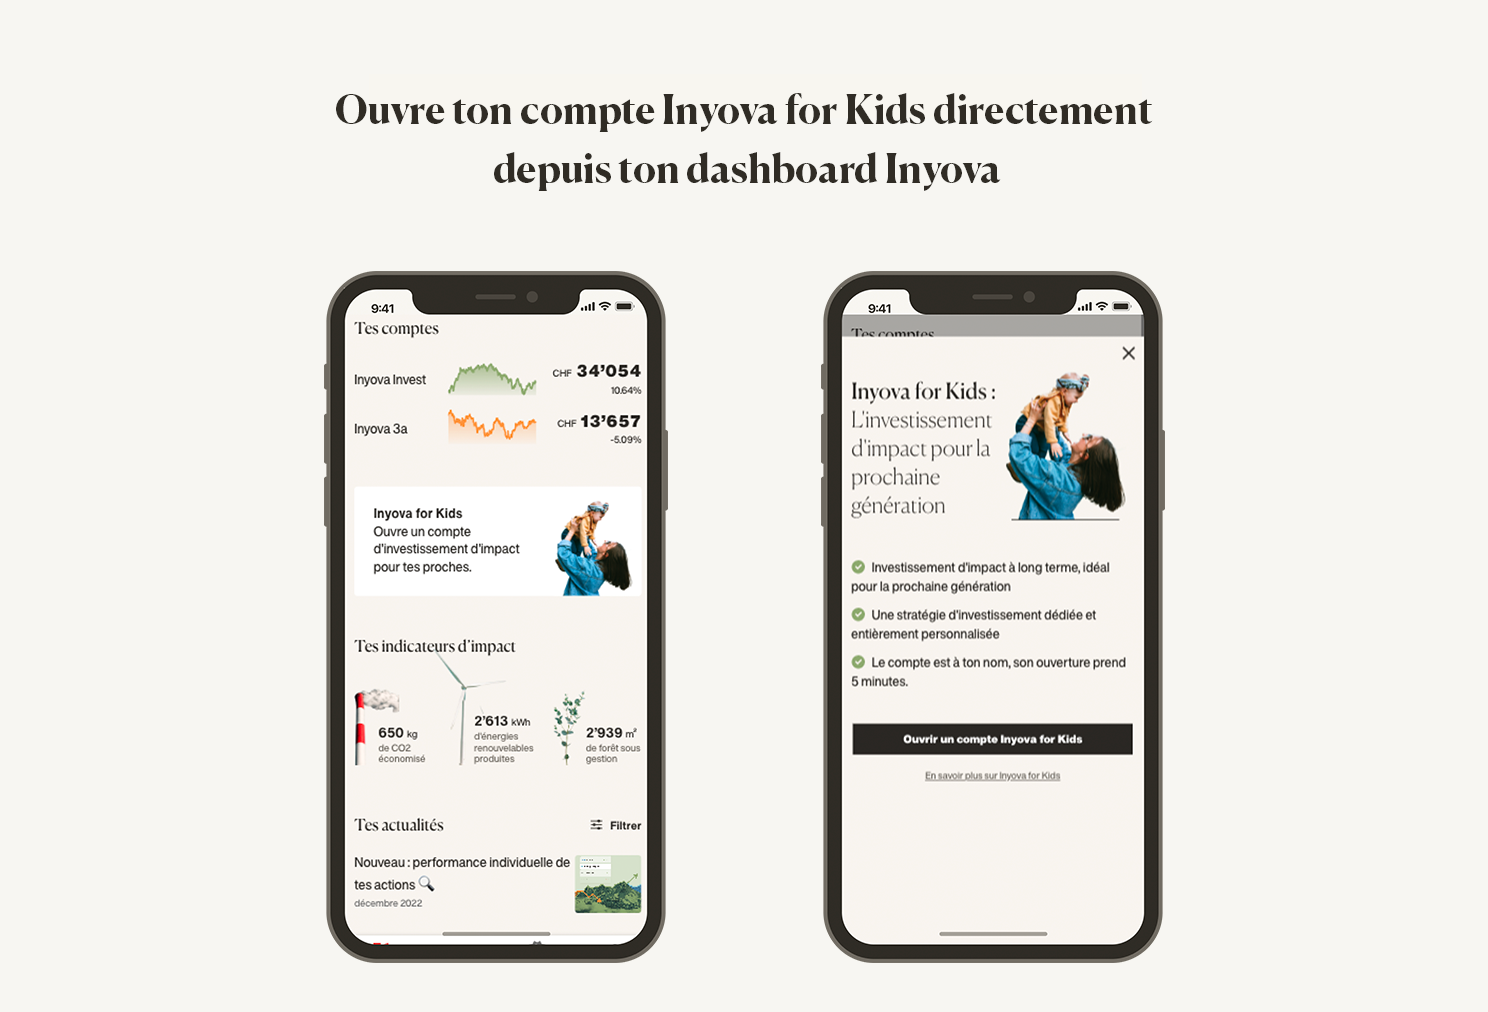 Ouvre un compte Inyova for Kids depuis ton dashboard